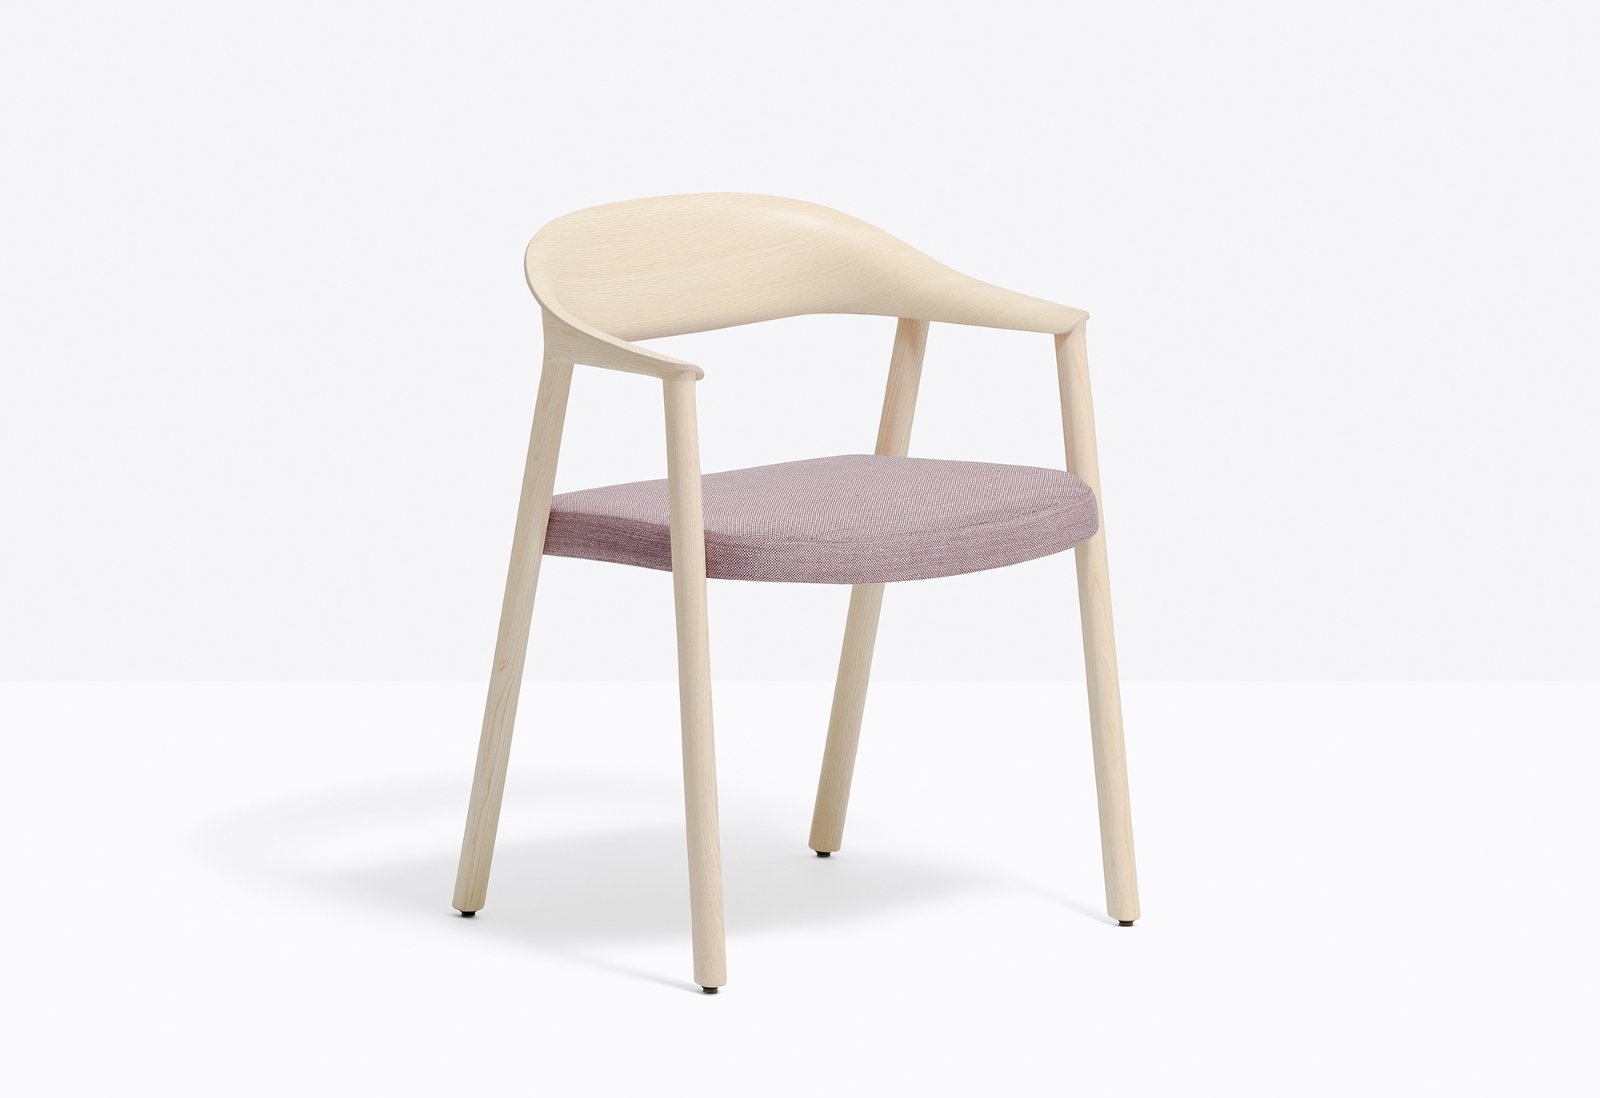 Hera 2865 Chair from Pedrali, designed by Patrick Jouin